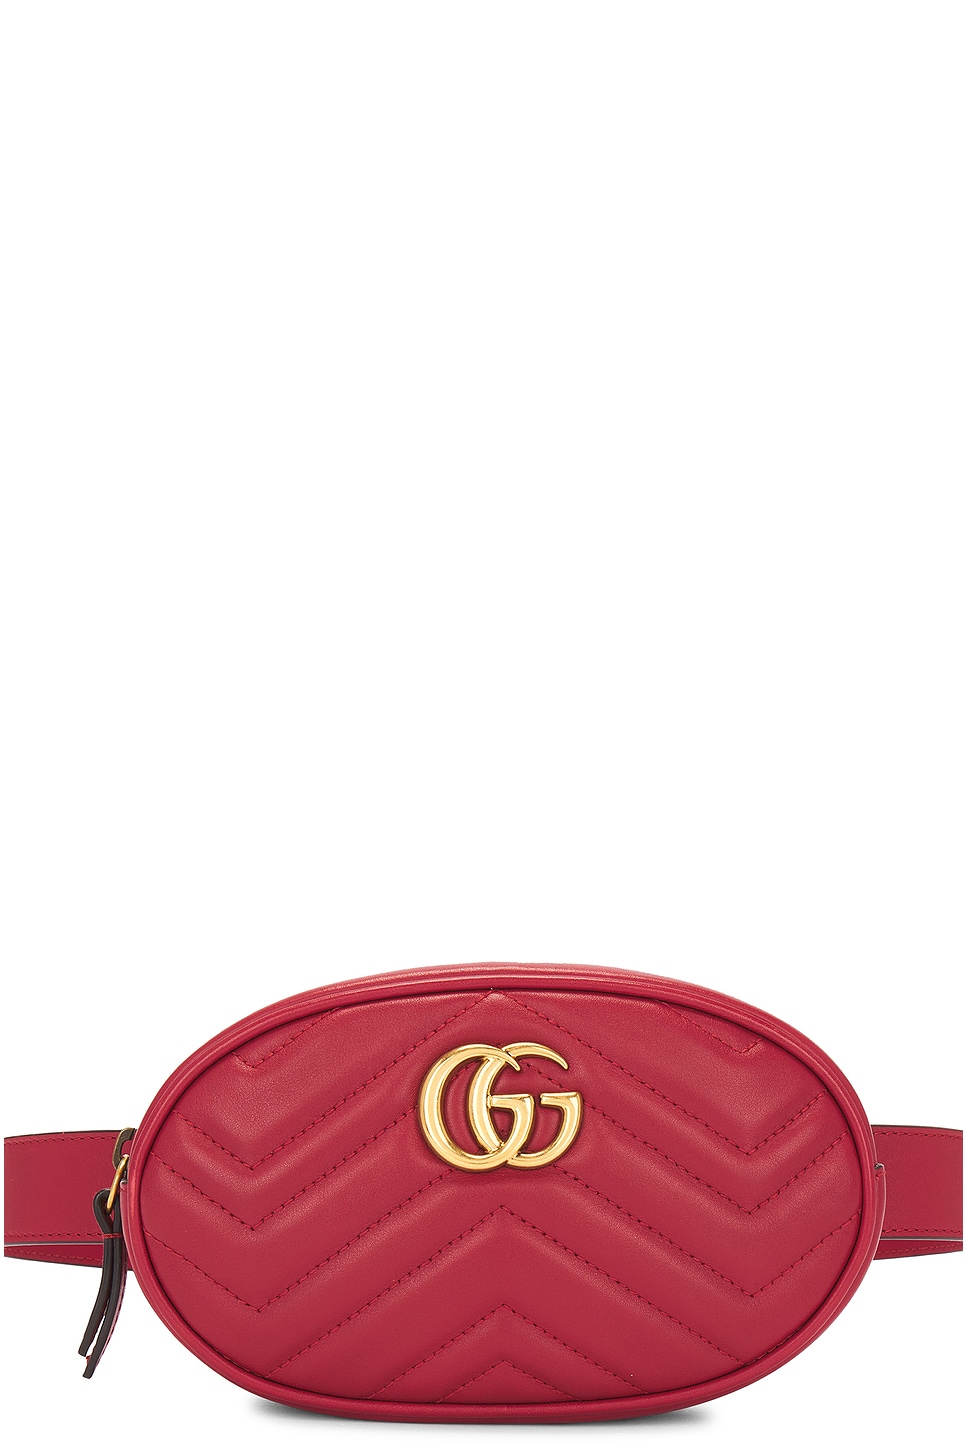 GG Marmont Quilted Leather Belt Bag in Red